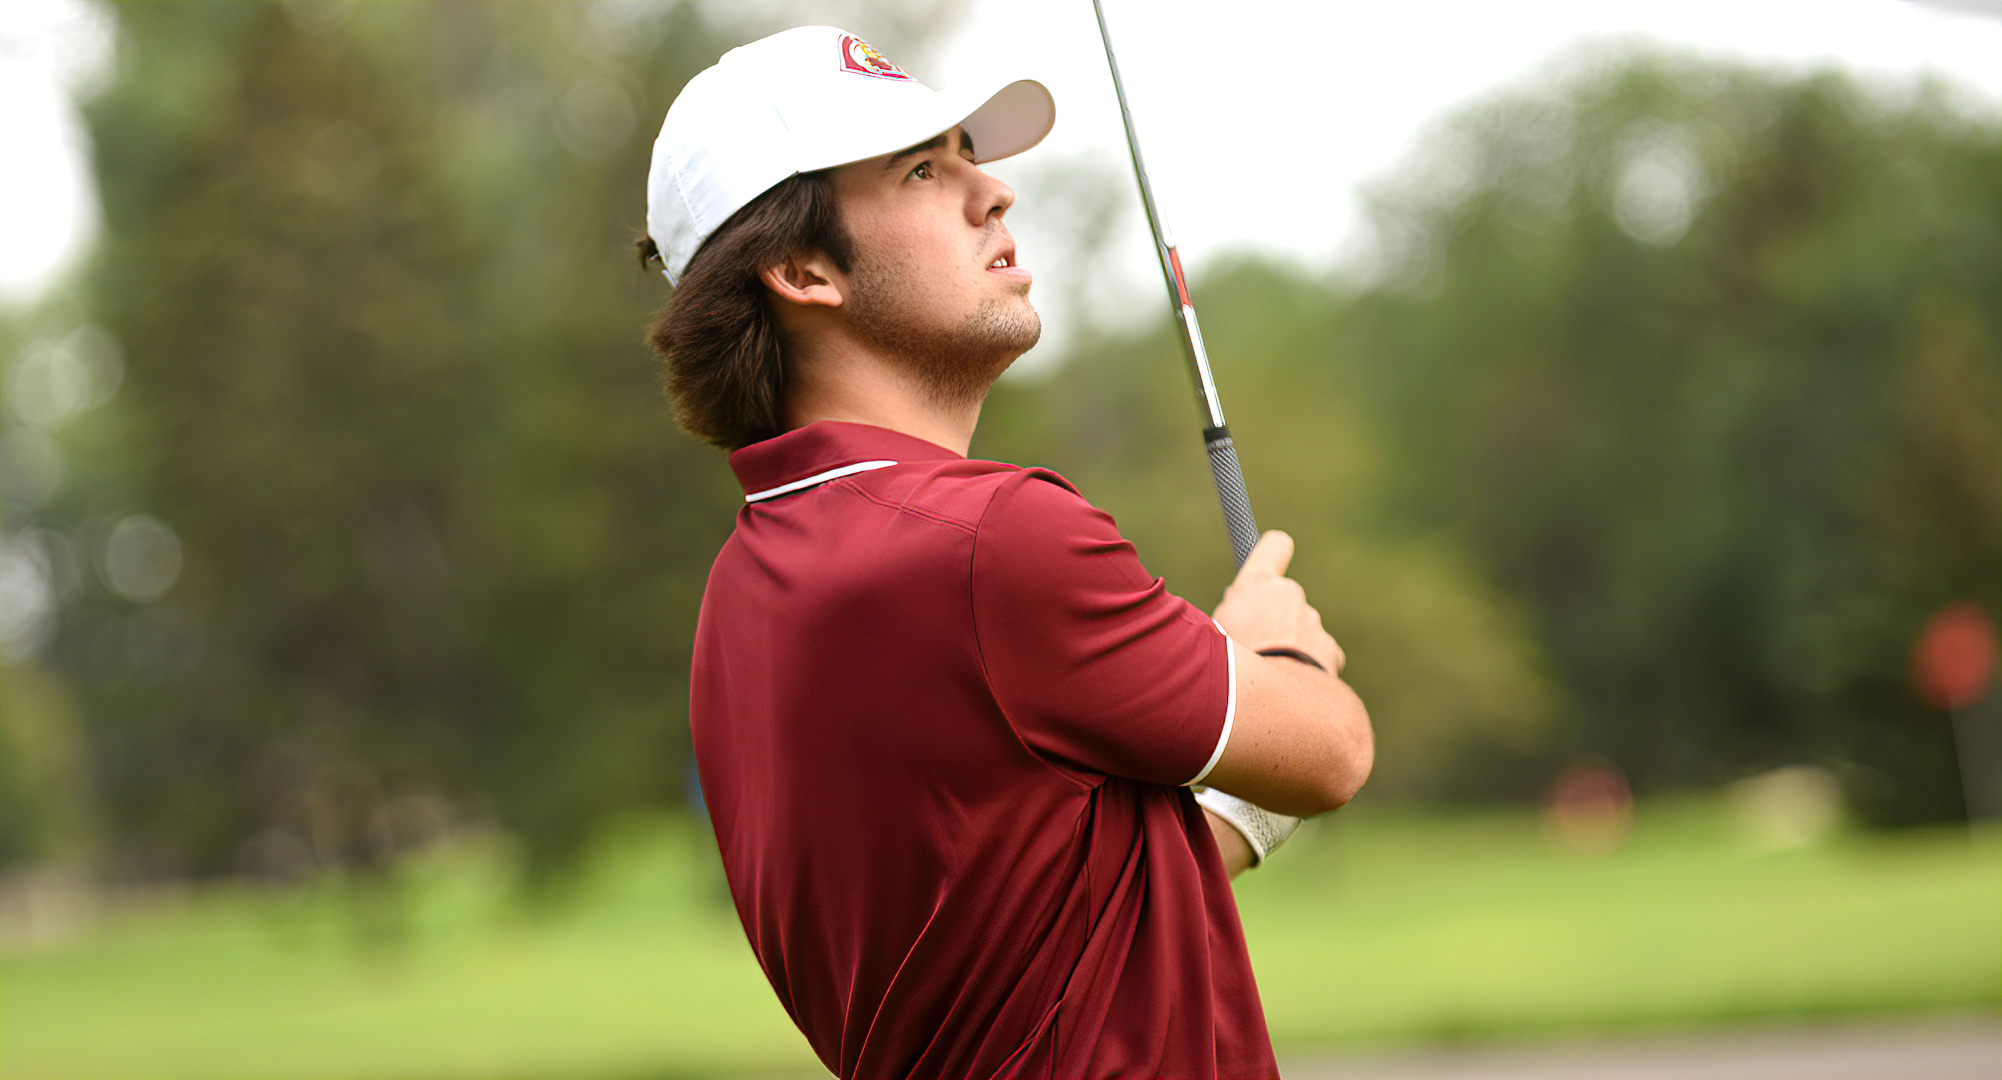 Ryan Jenson led Concordia at the SJU Spring Invite at Monticello CC. He shot an 80 at the 1-day tournament.